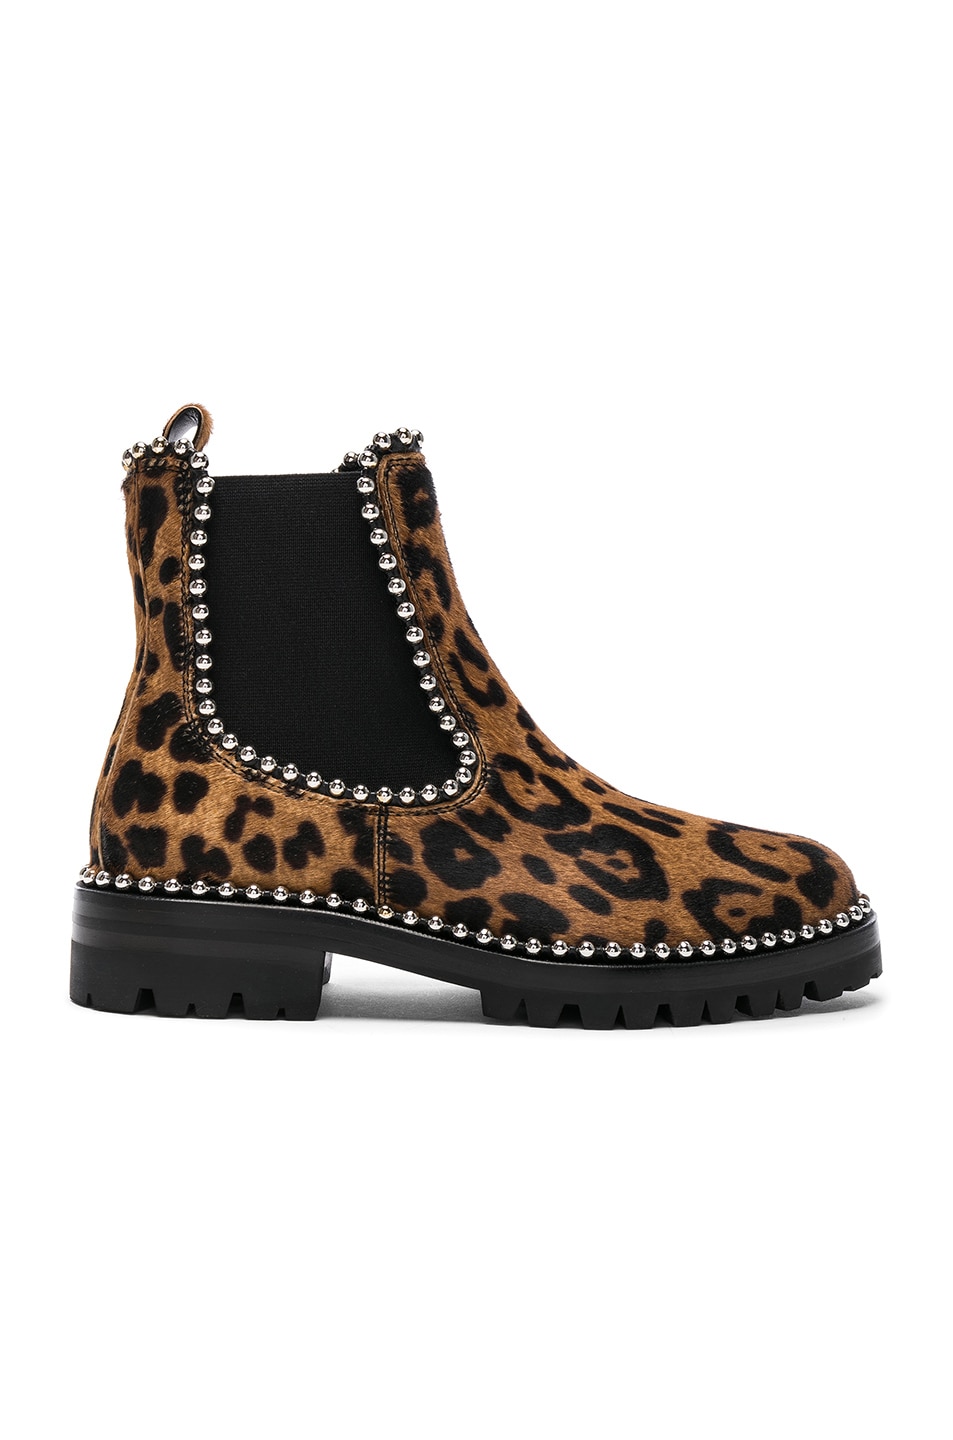 Image 1 of Alexander Wang Printed Calf Hair Spencer Boots in Leopard